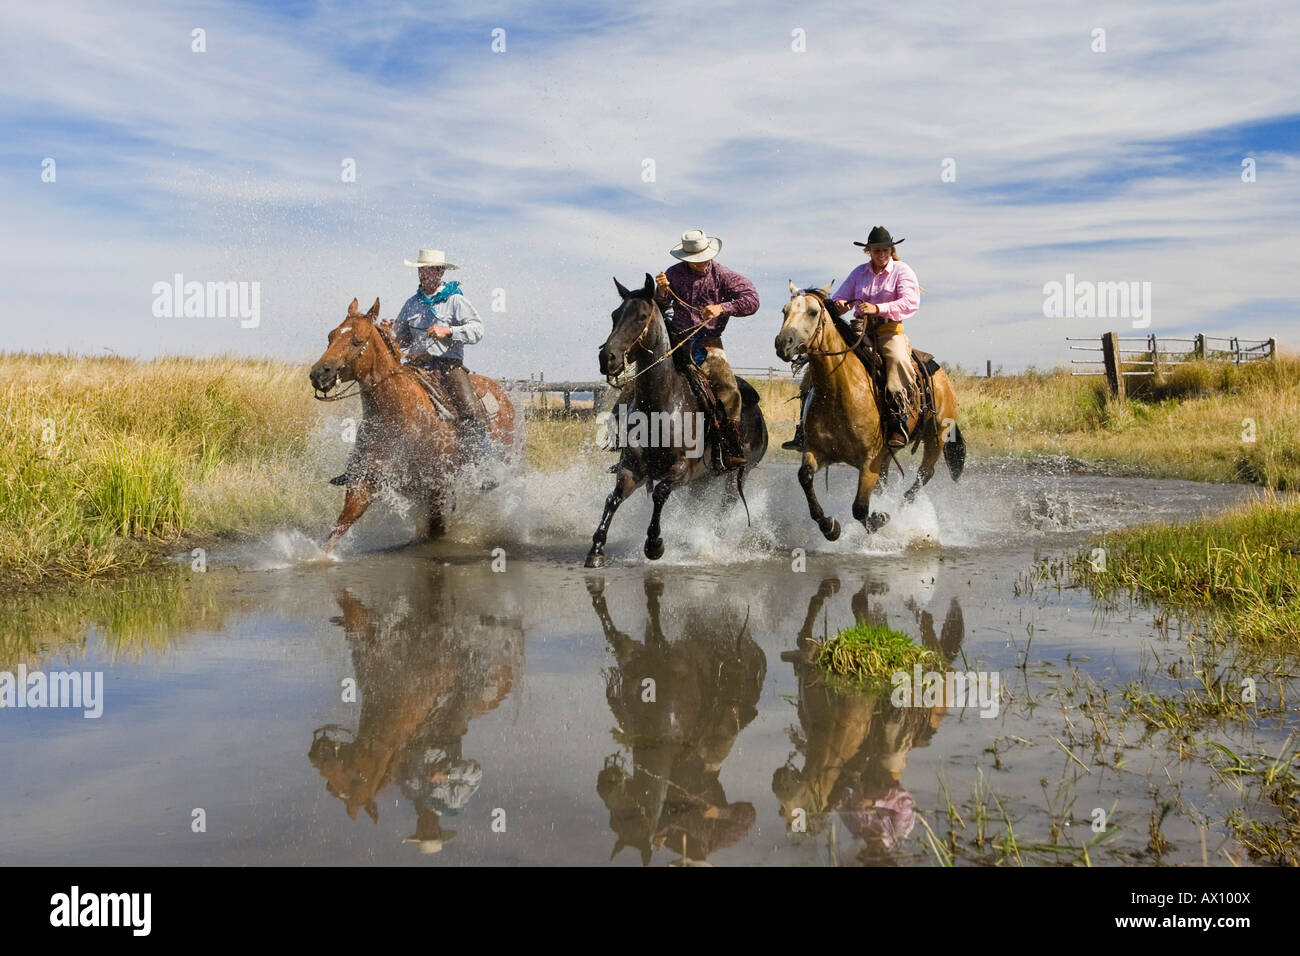 Cowgirl and cowboys riding in water, Oregon, USA Stock Photo